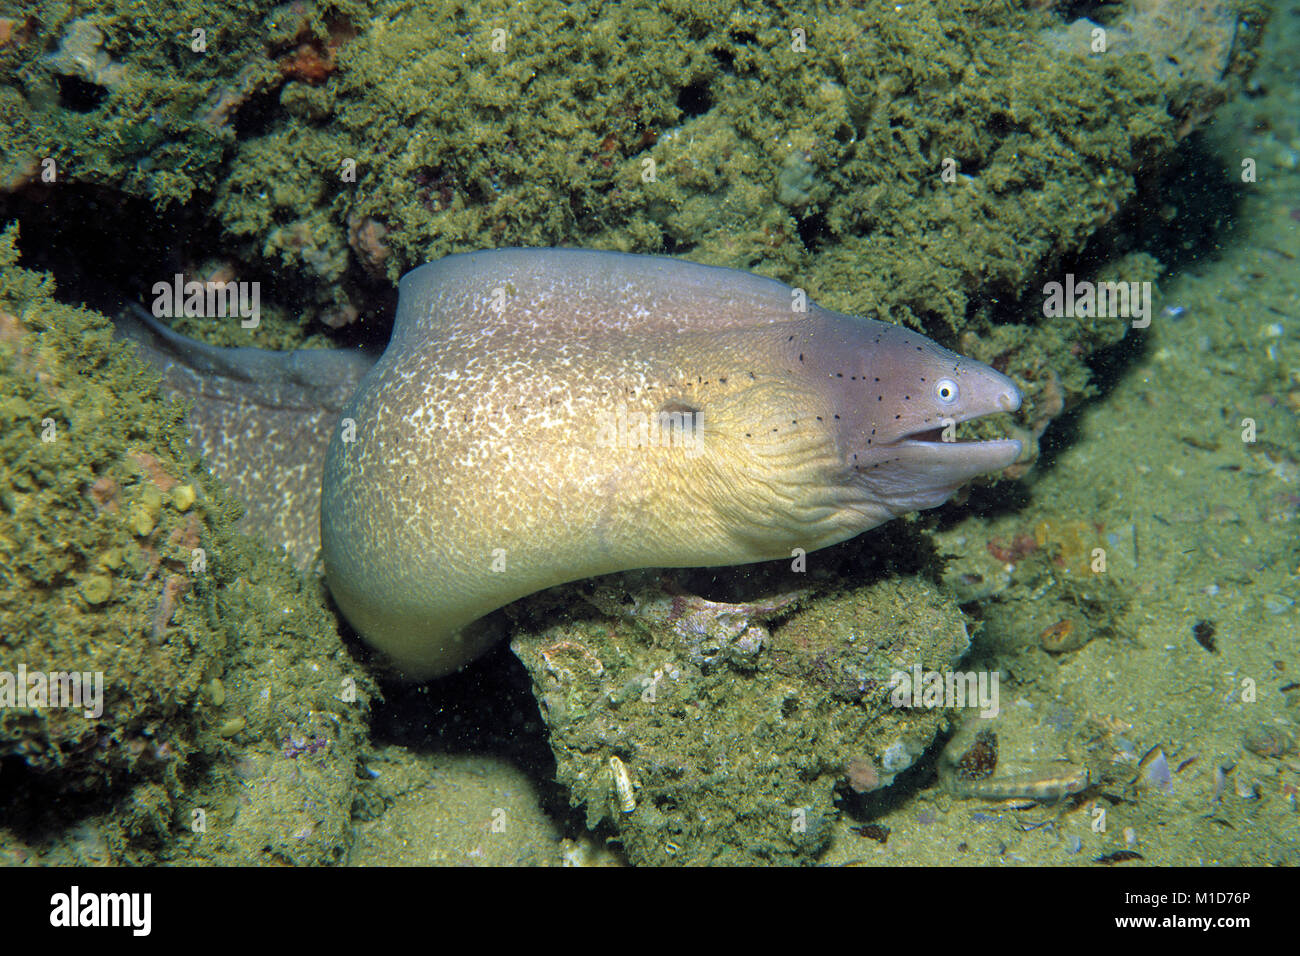 Peppered moray (Siderea grisea), Damanyiat Island, Muscat, Oman, Indian ocean Stock Photo